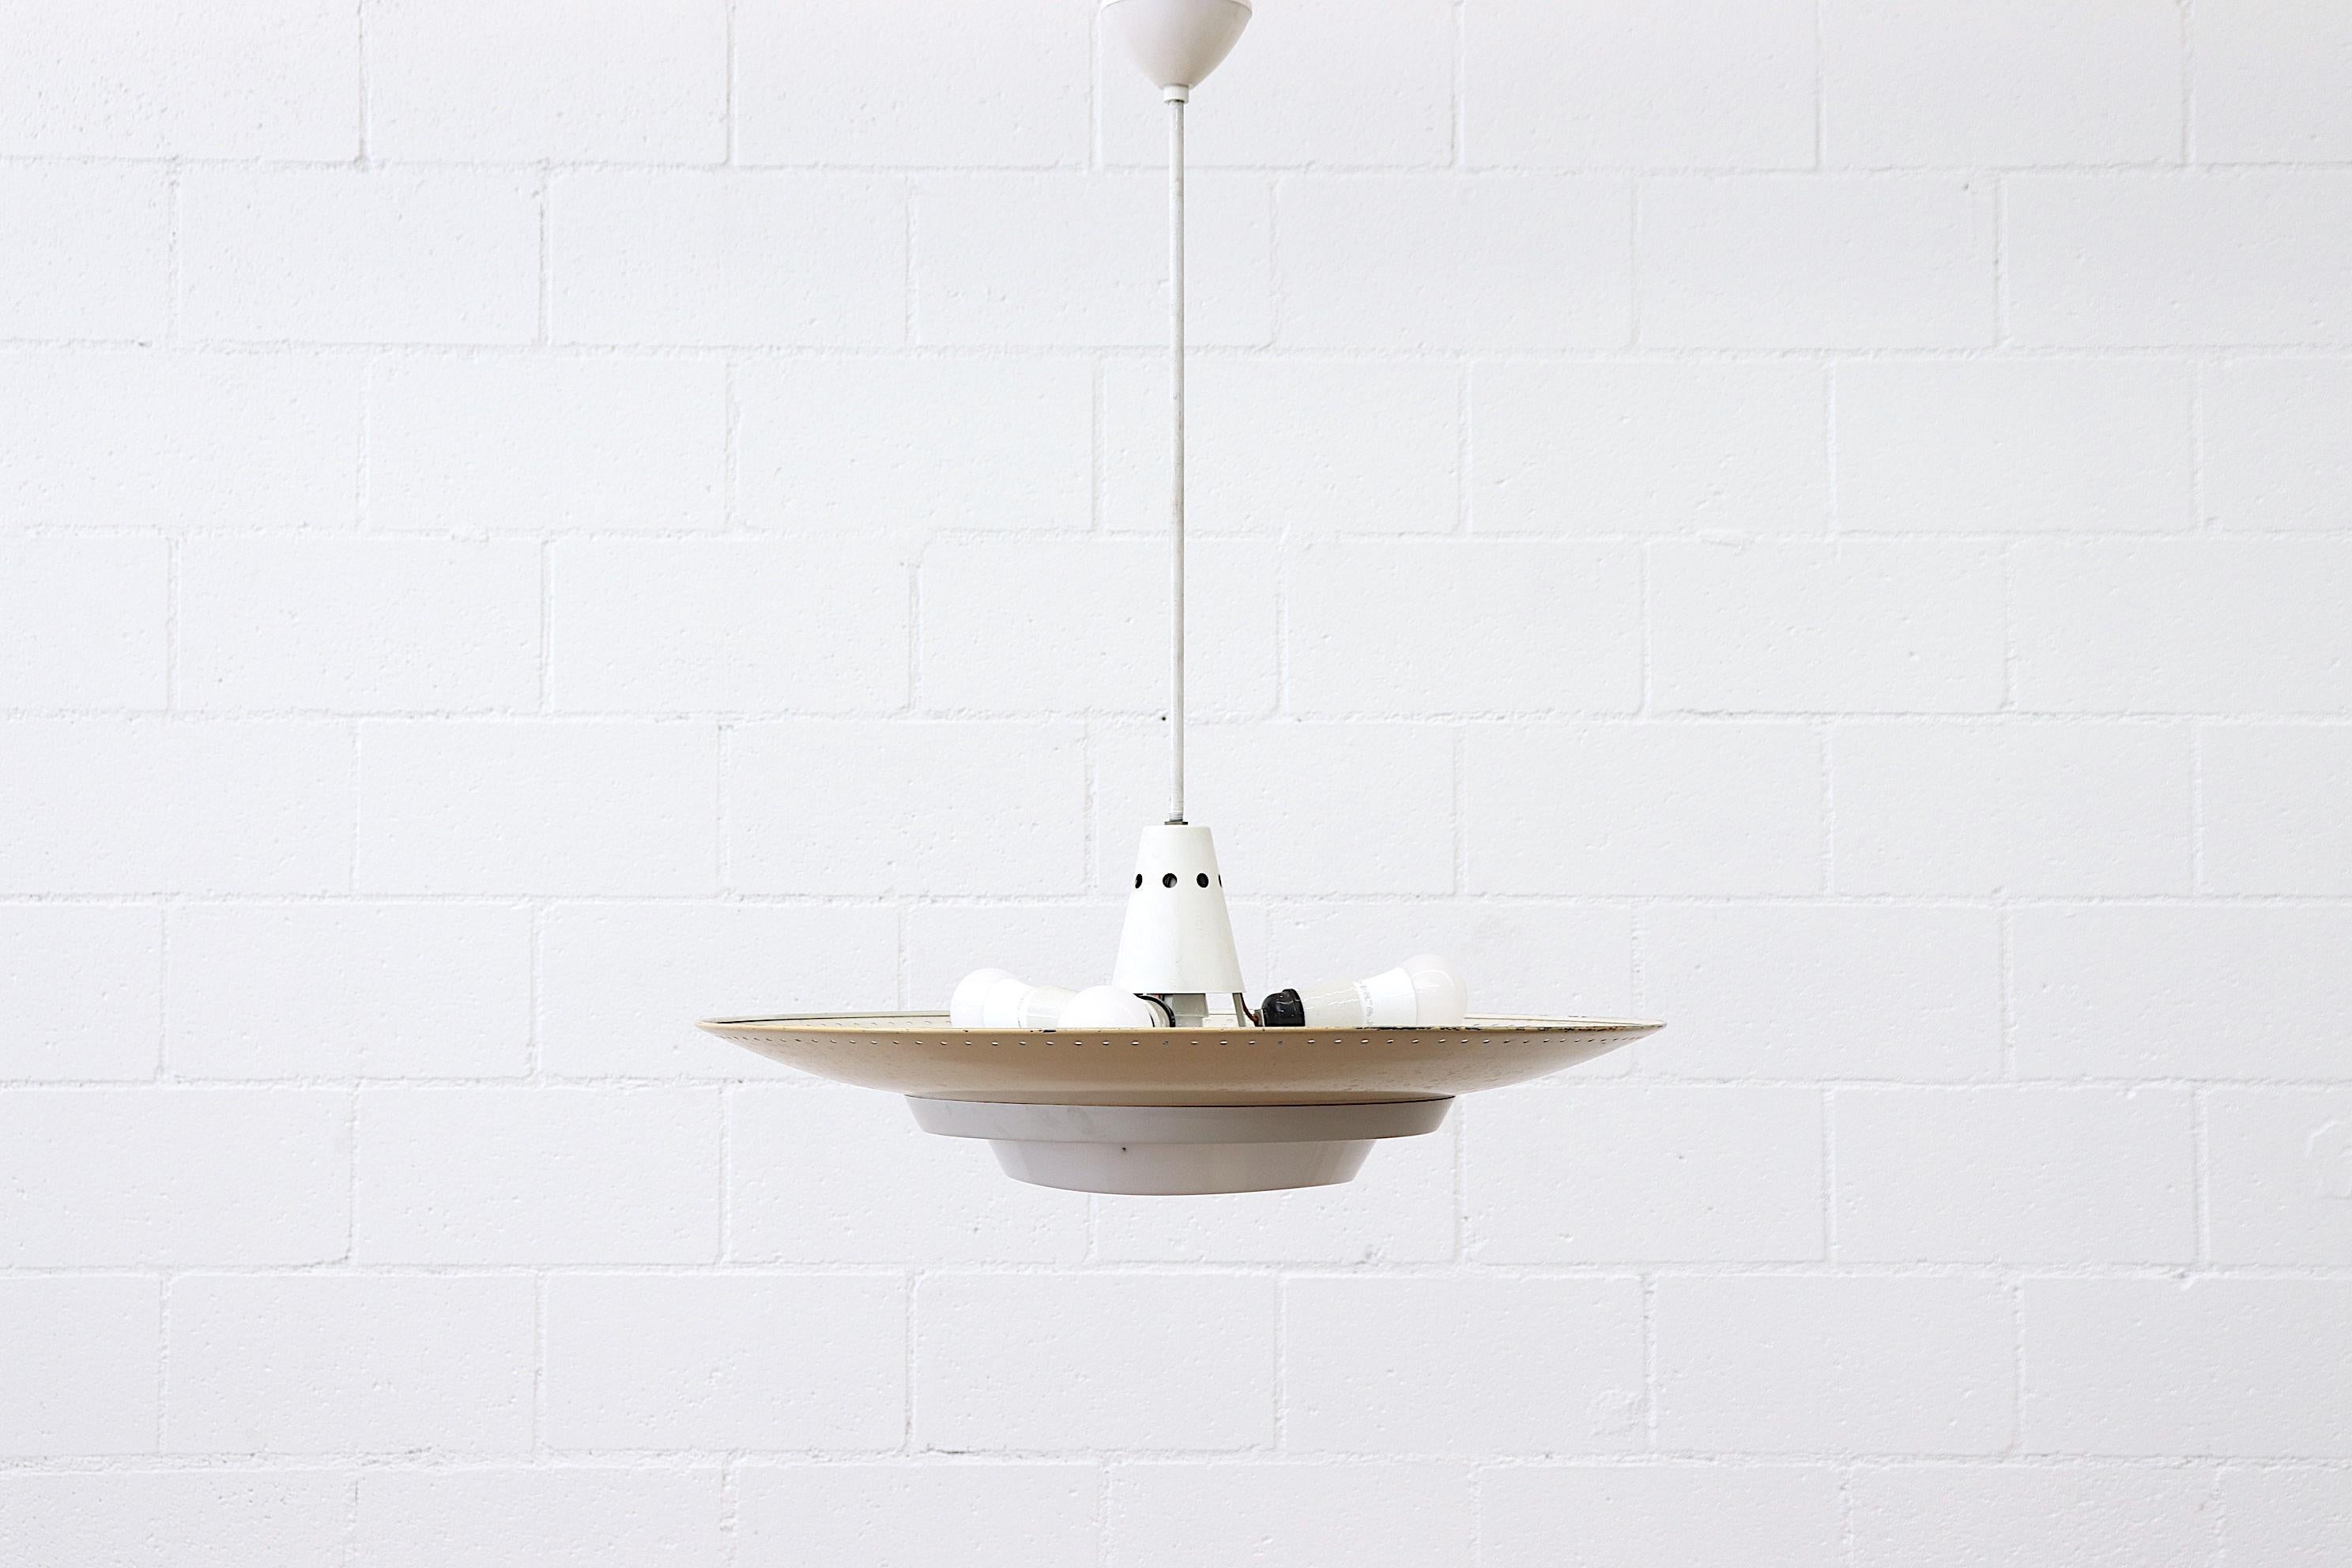 Original 1950s industrial enameled metal Rondelle ceiling pendant. Yellow enameled spun aluminum shade with perforated edge, and bone white accents. Triple light sockets for uplighting and a single spot for below. White acrylic diffuser ring that